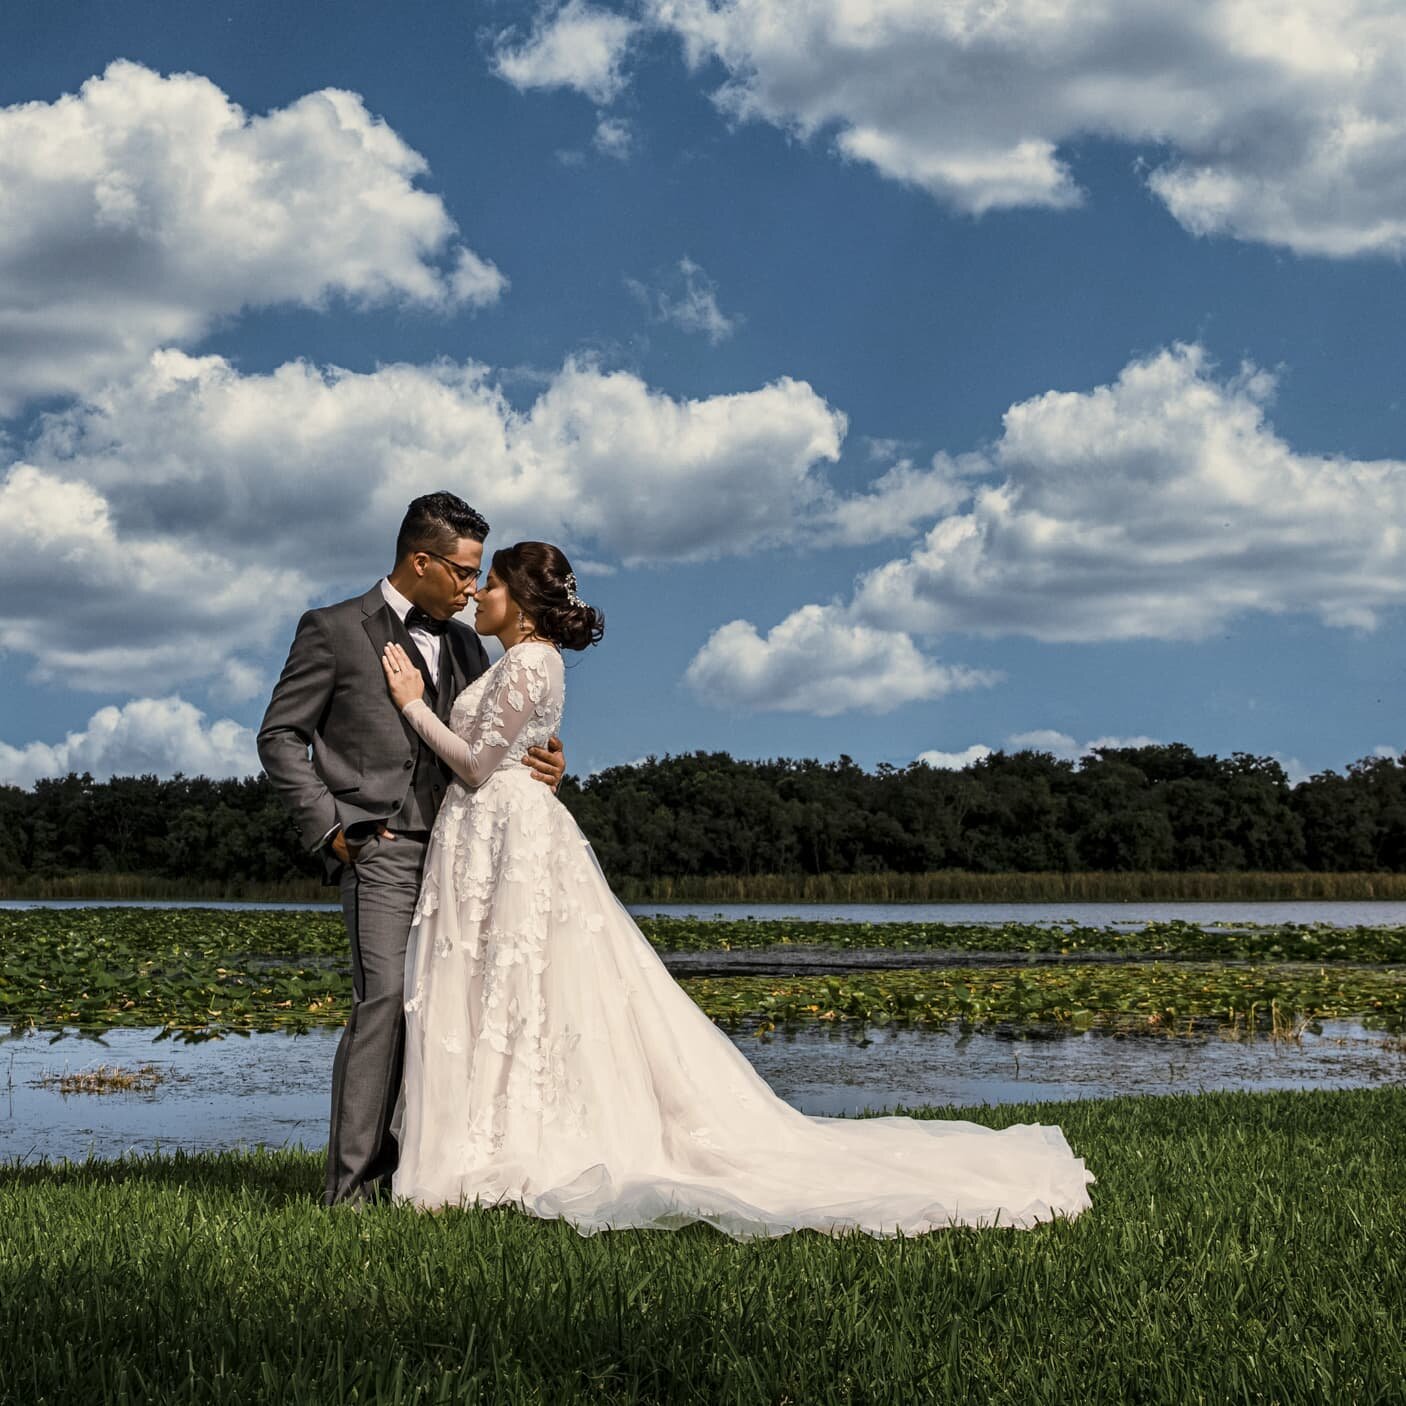 Harmony in the lake. The flow of love between two souls who would be willing to die for each another. This was a really special wedding for me because I had the honor to be the photographer in my nephew's wedding. Featuring @nataliesan9 &amp; @urena_